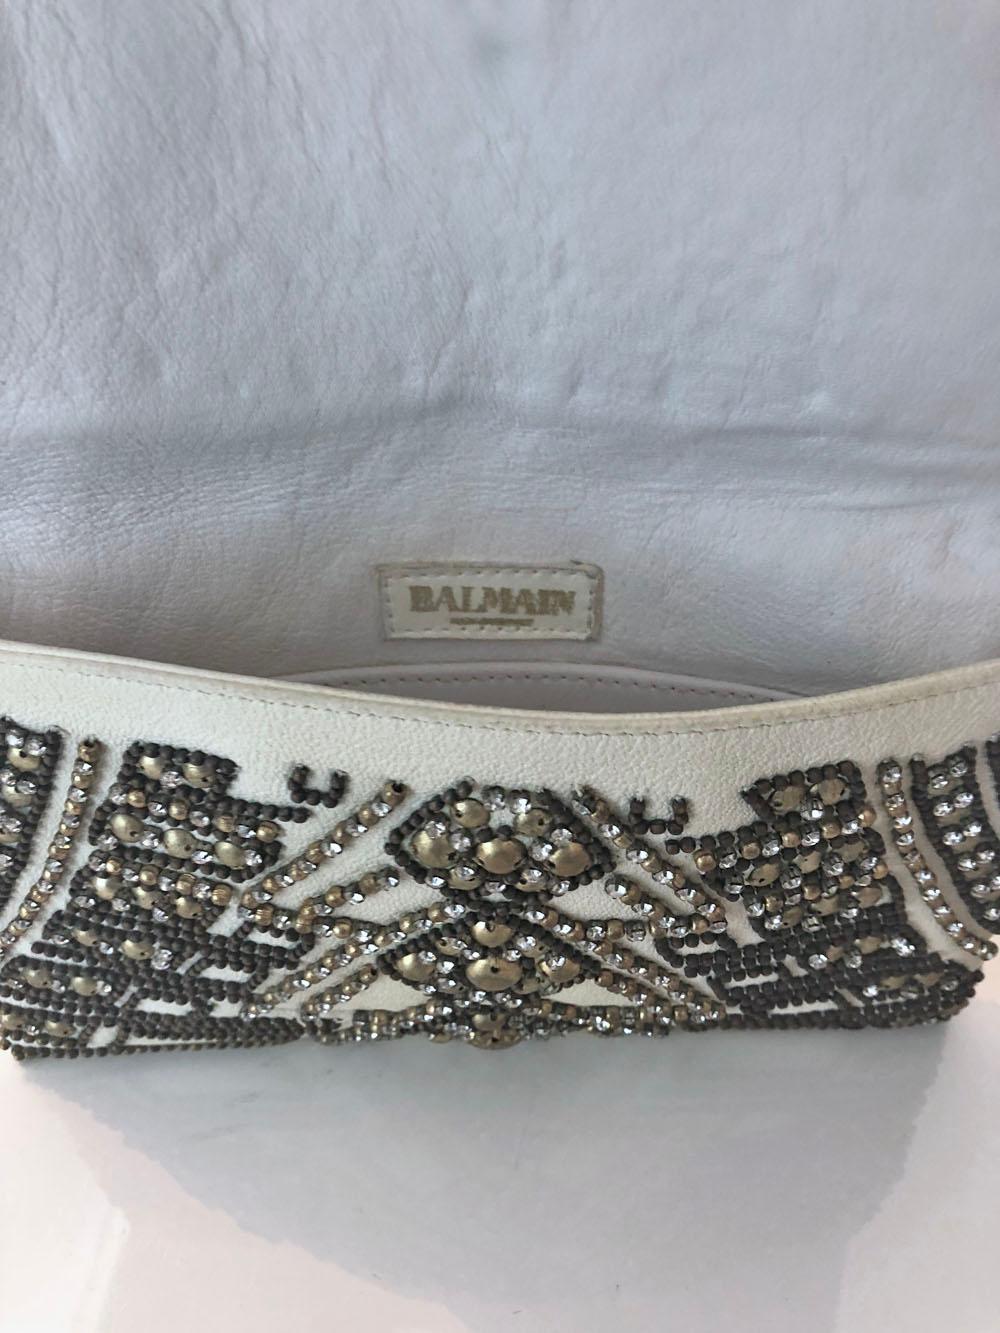 Balmain Cream Embellished Clutch In Excellent Condition In Thousand Oaks, CA